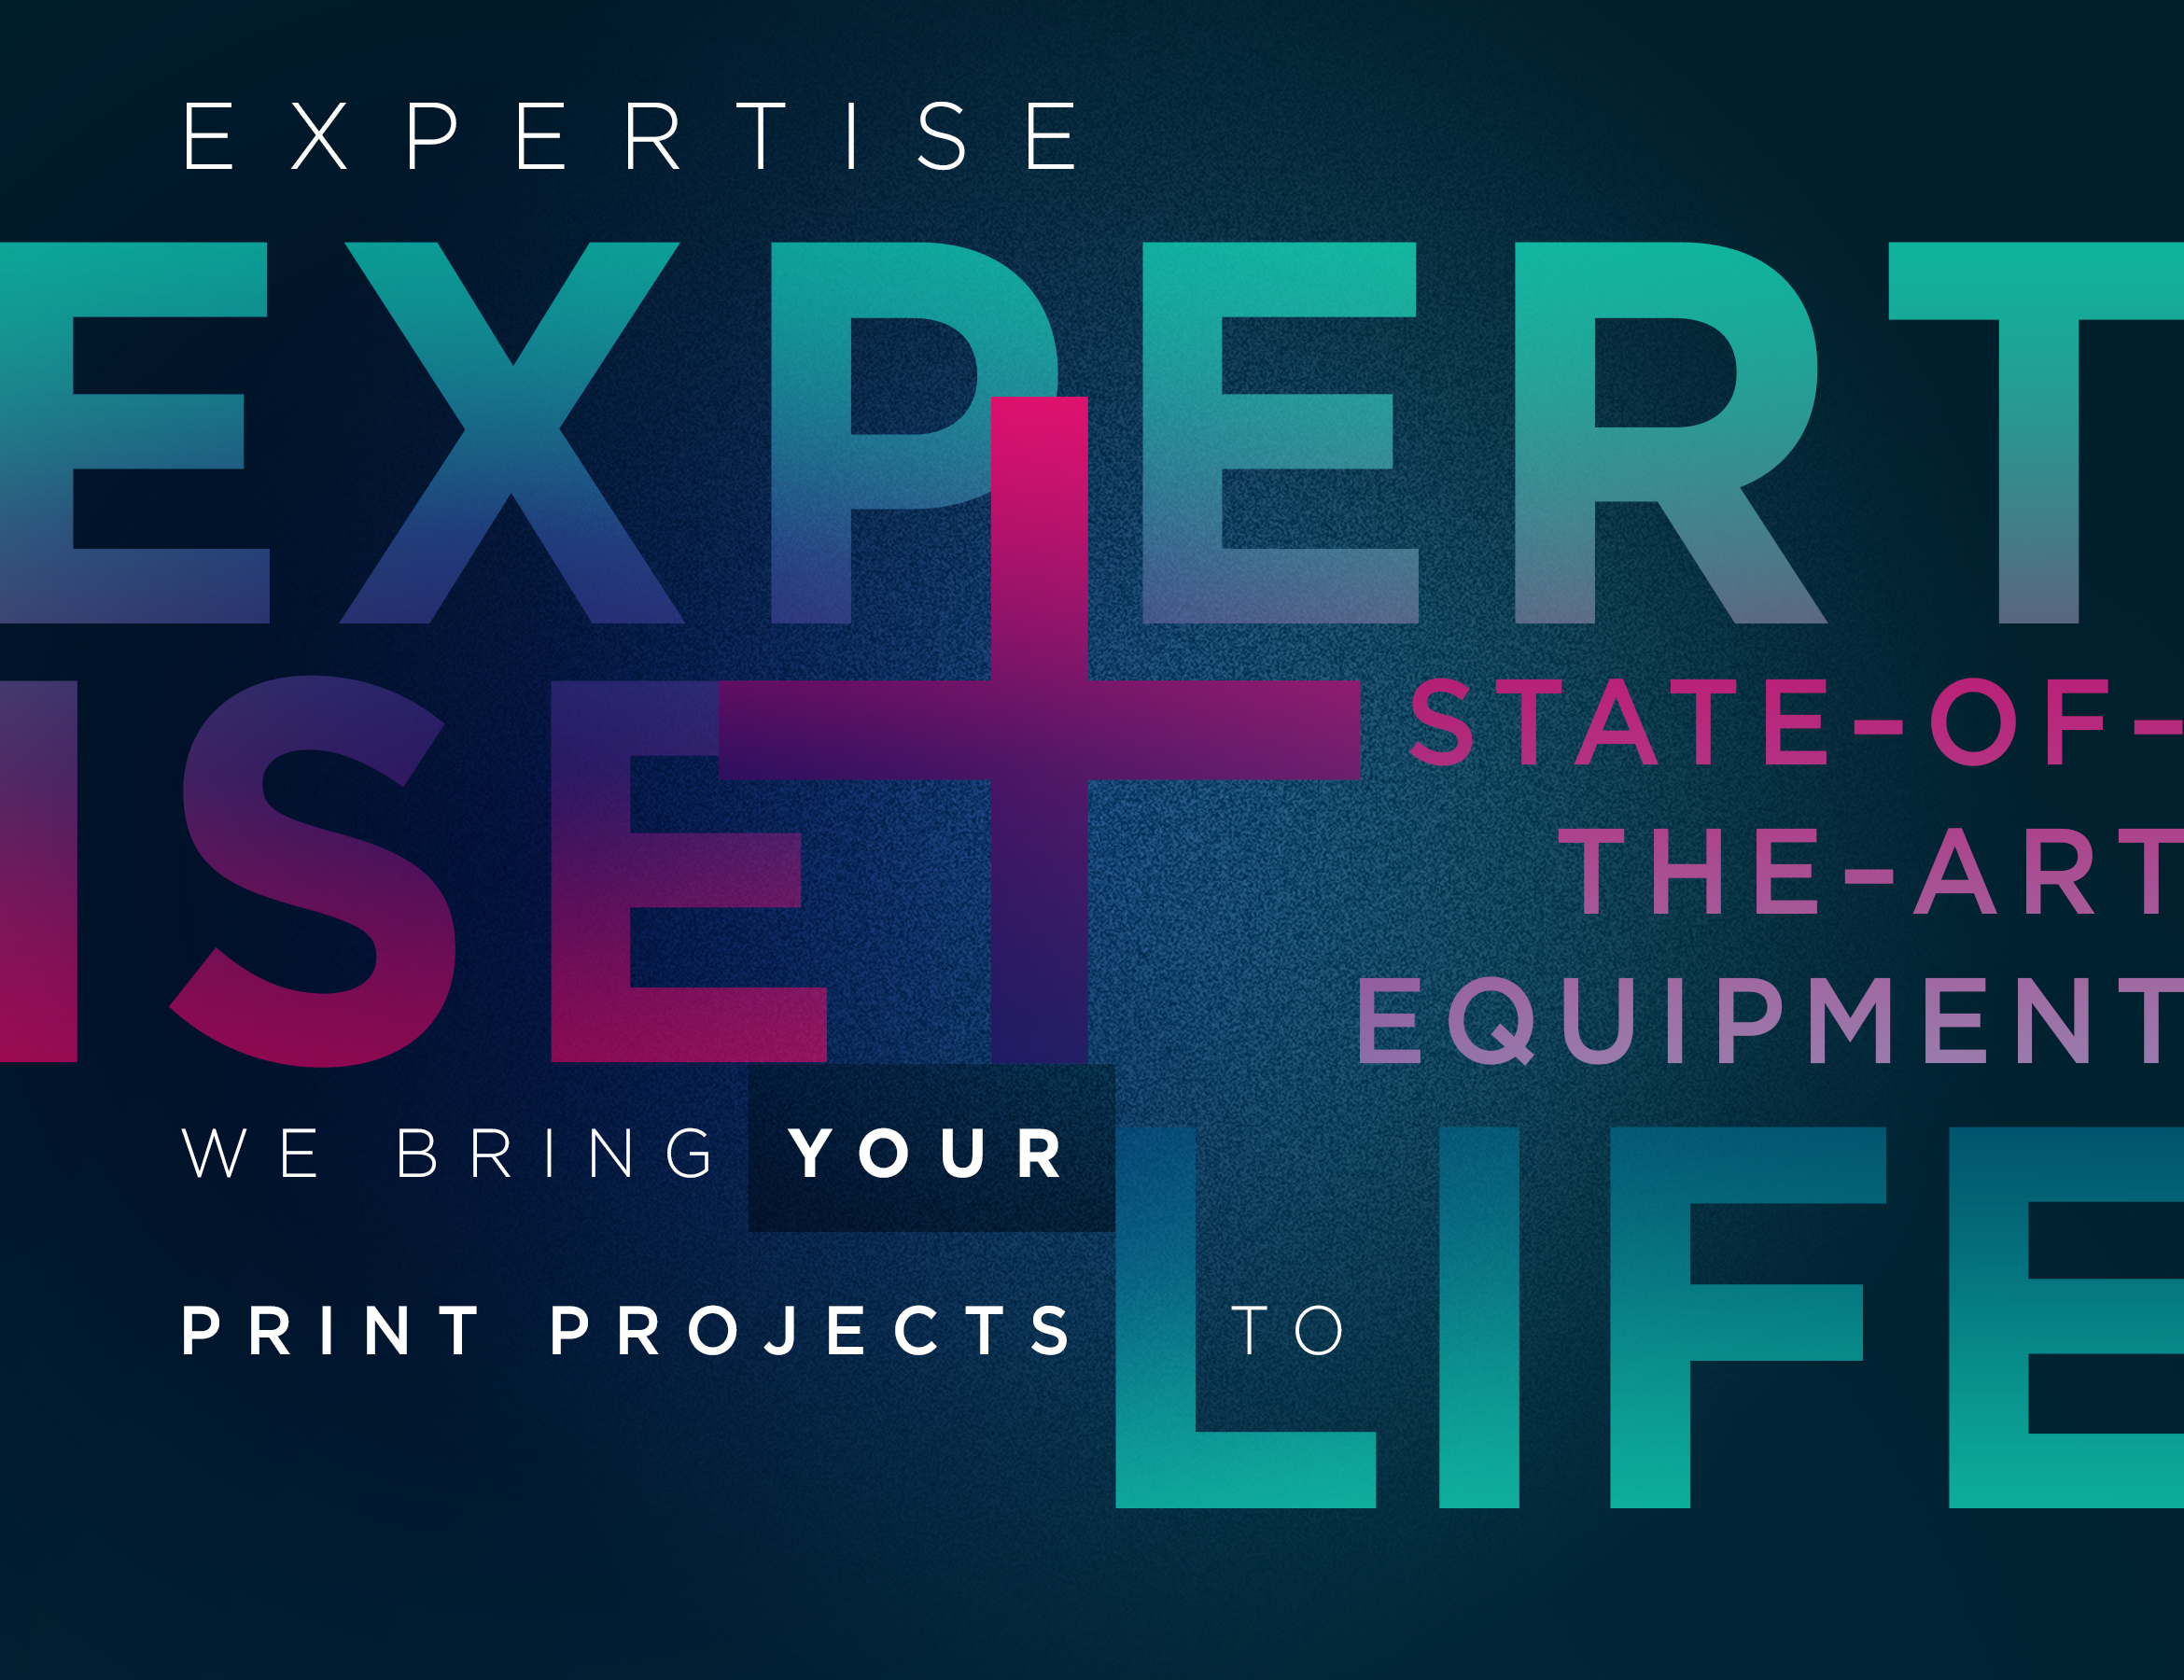 Expertise + State-of-the-Art Equipment